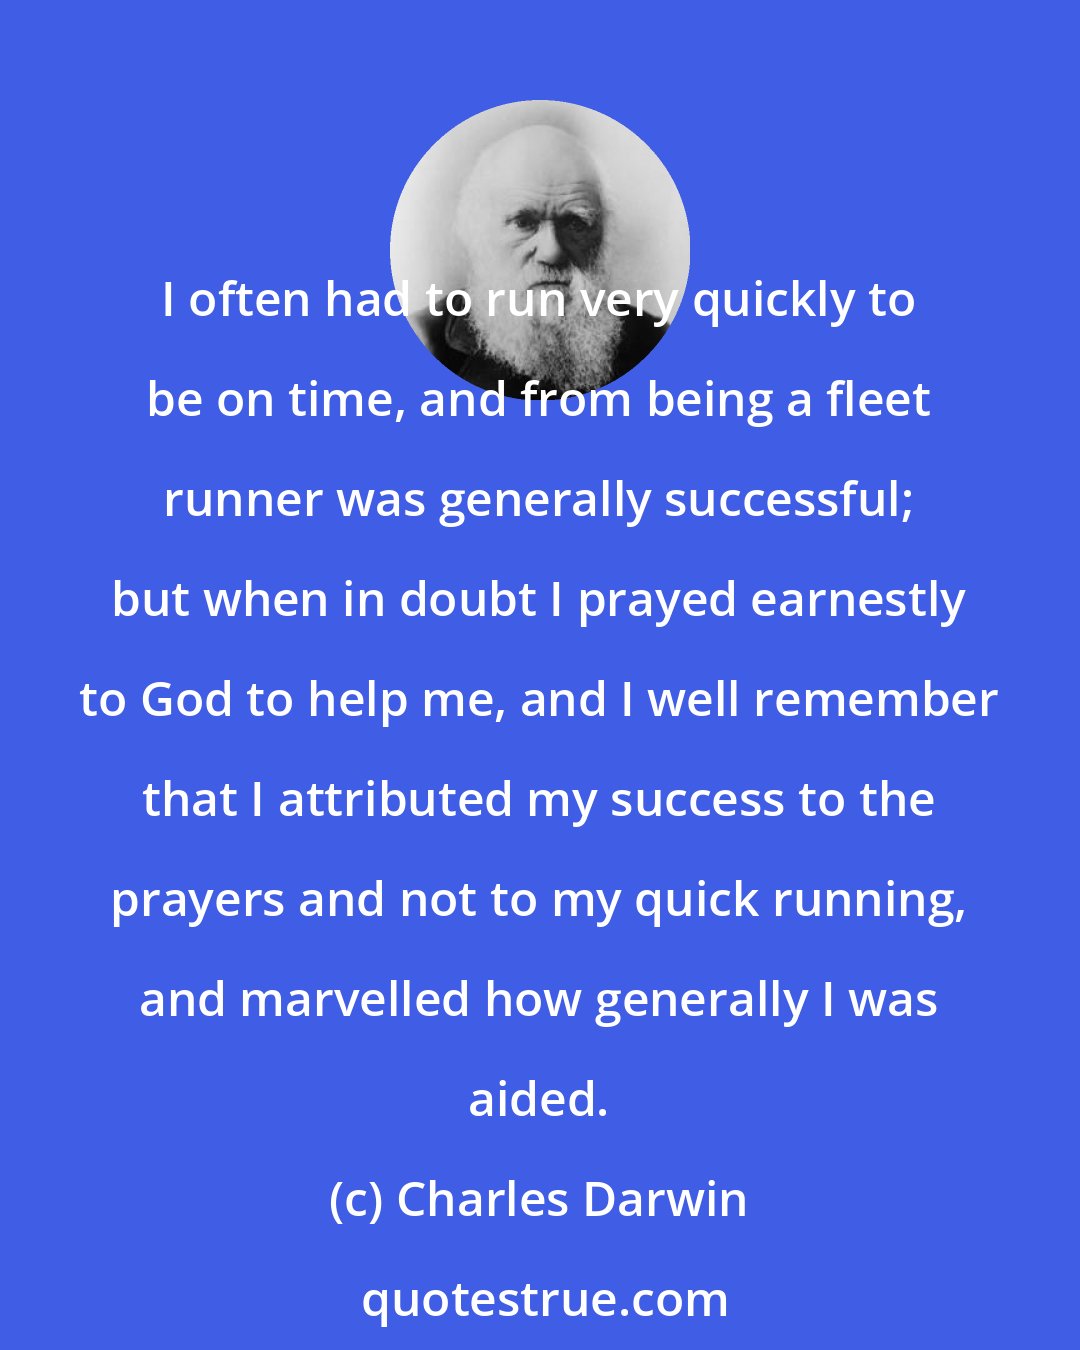 Charles Darwin: I often had to run very quickly to be on time, and from being a fleet runner was generally successful; but when in doubt I prayed earnestly to God to help me, and I well remember that I attributed my success to the prayers and not to my quick running, and marvelled how generally I was aided.